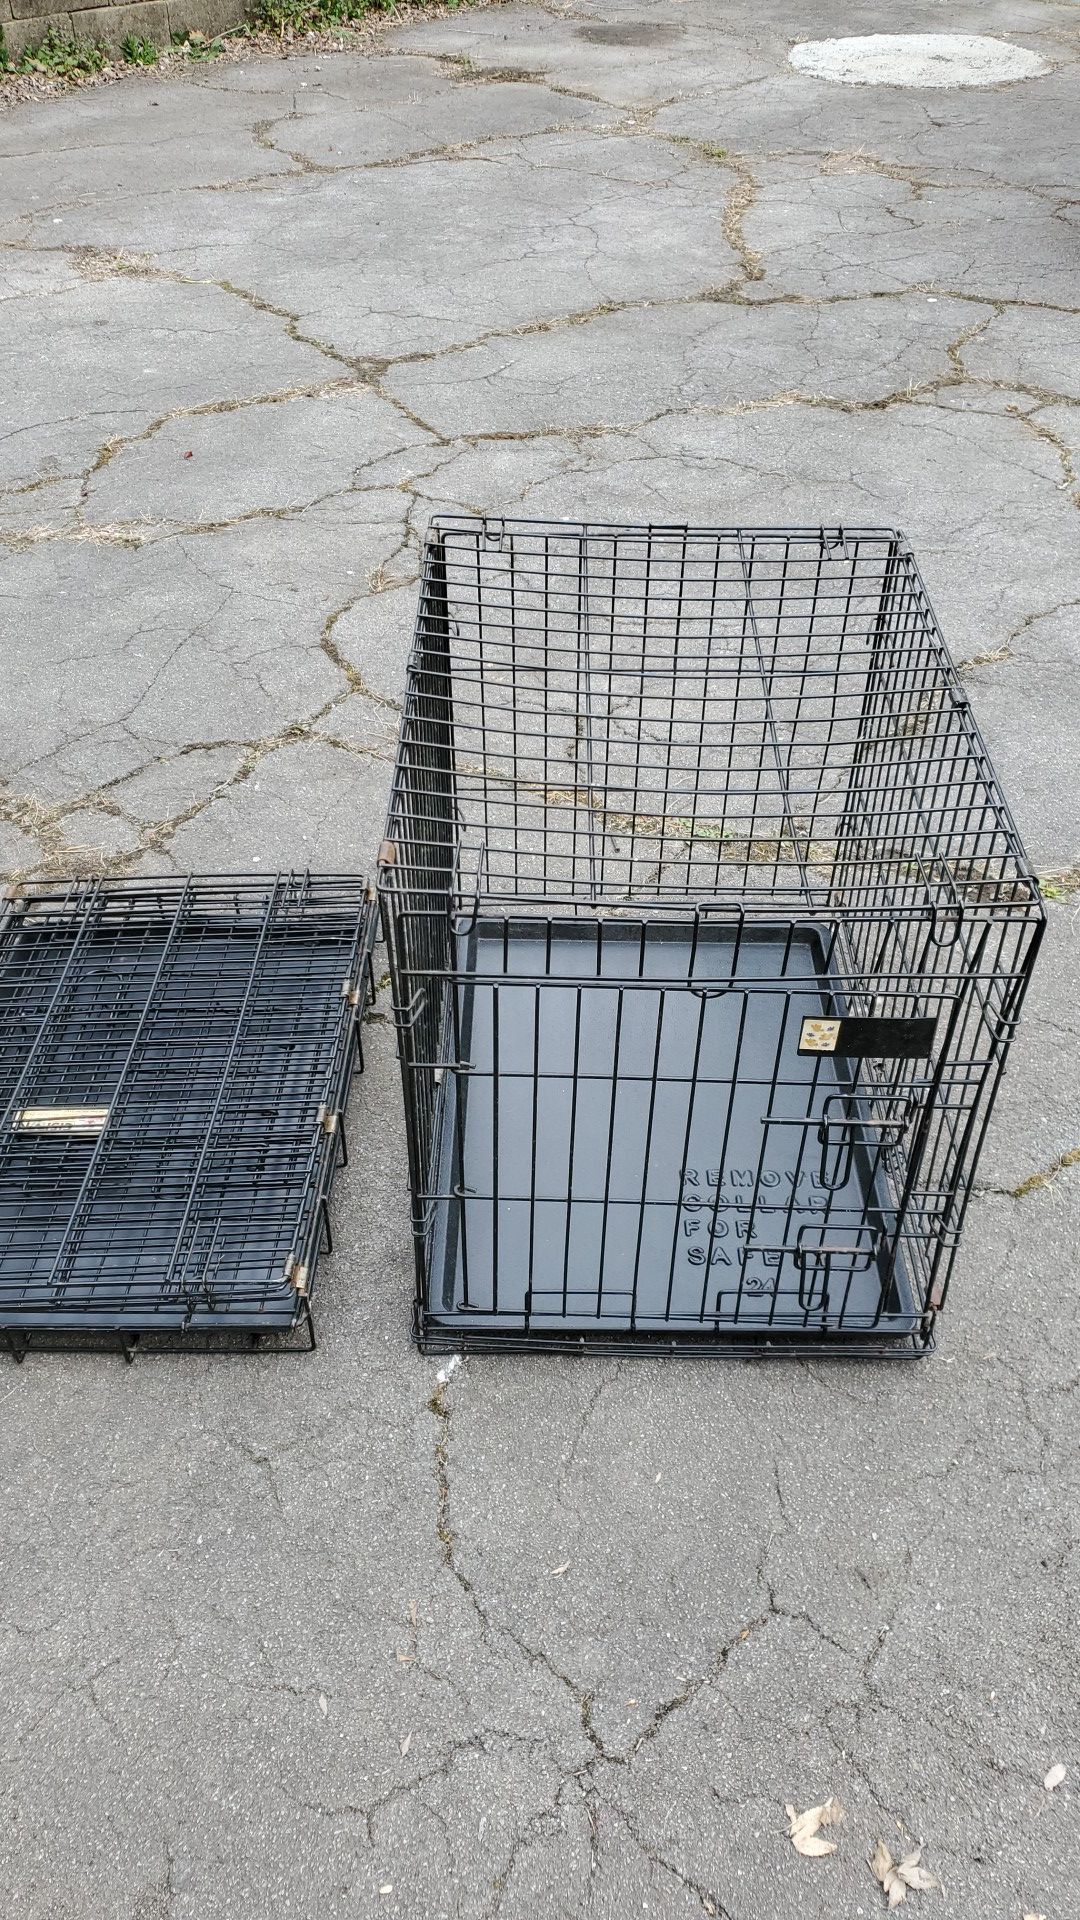 Two small collapsible dog crates